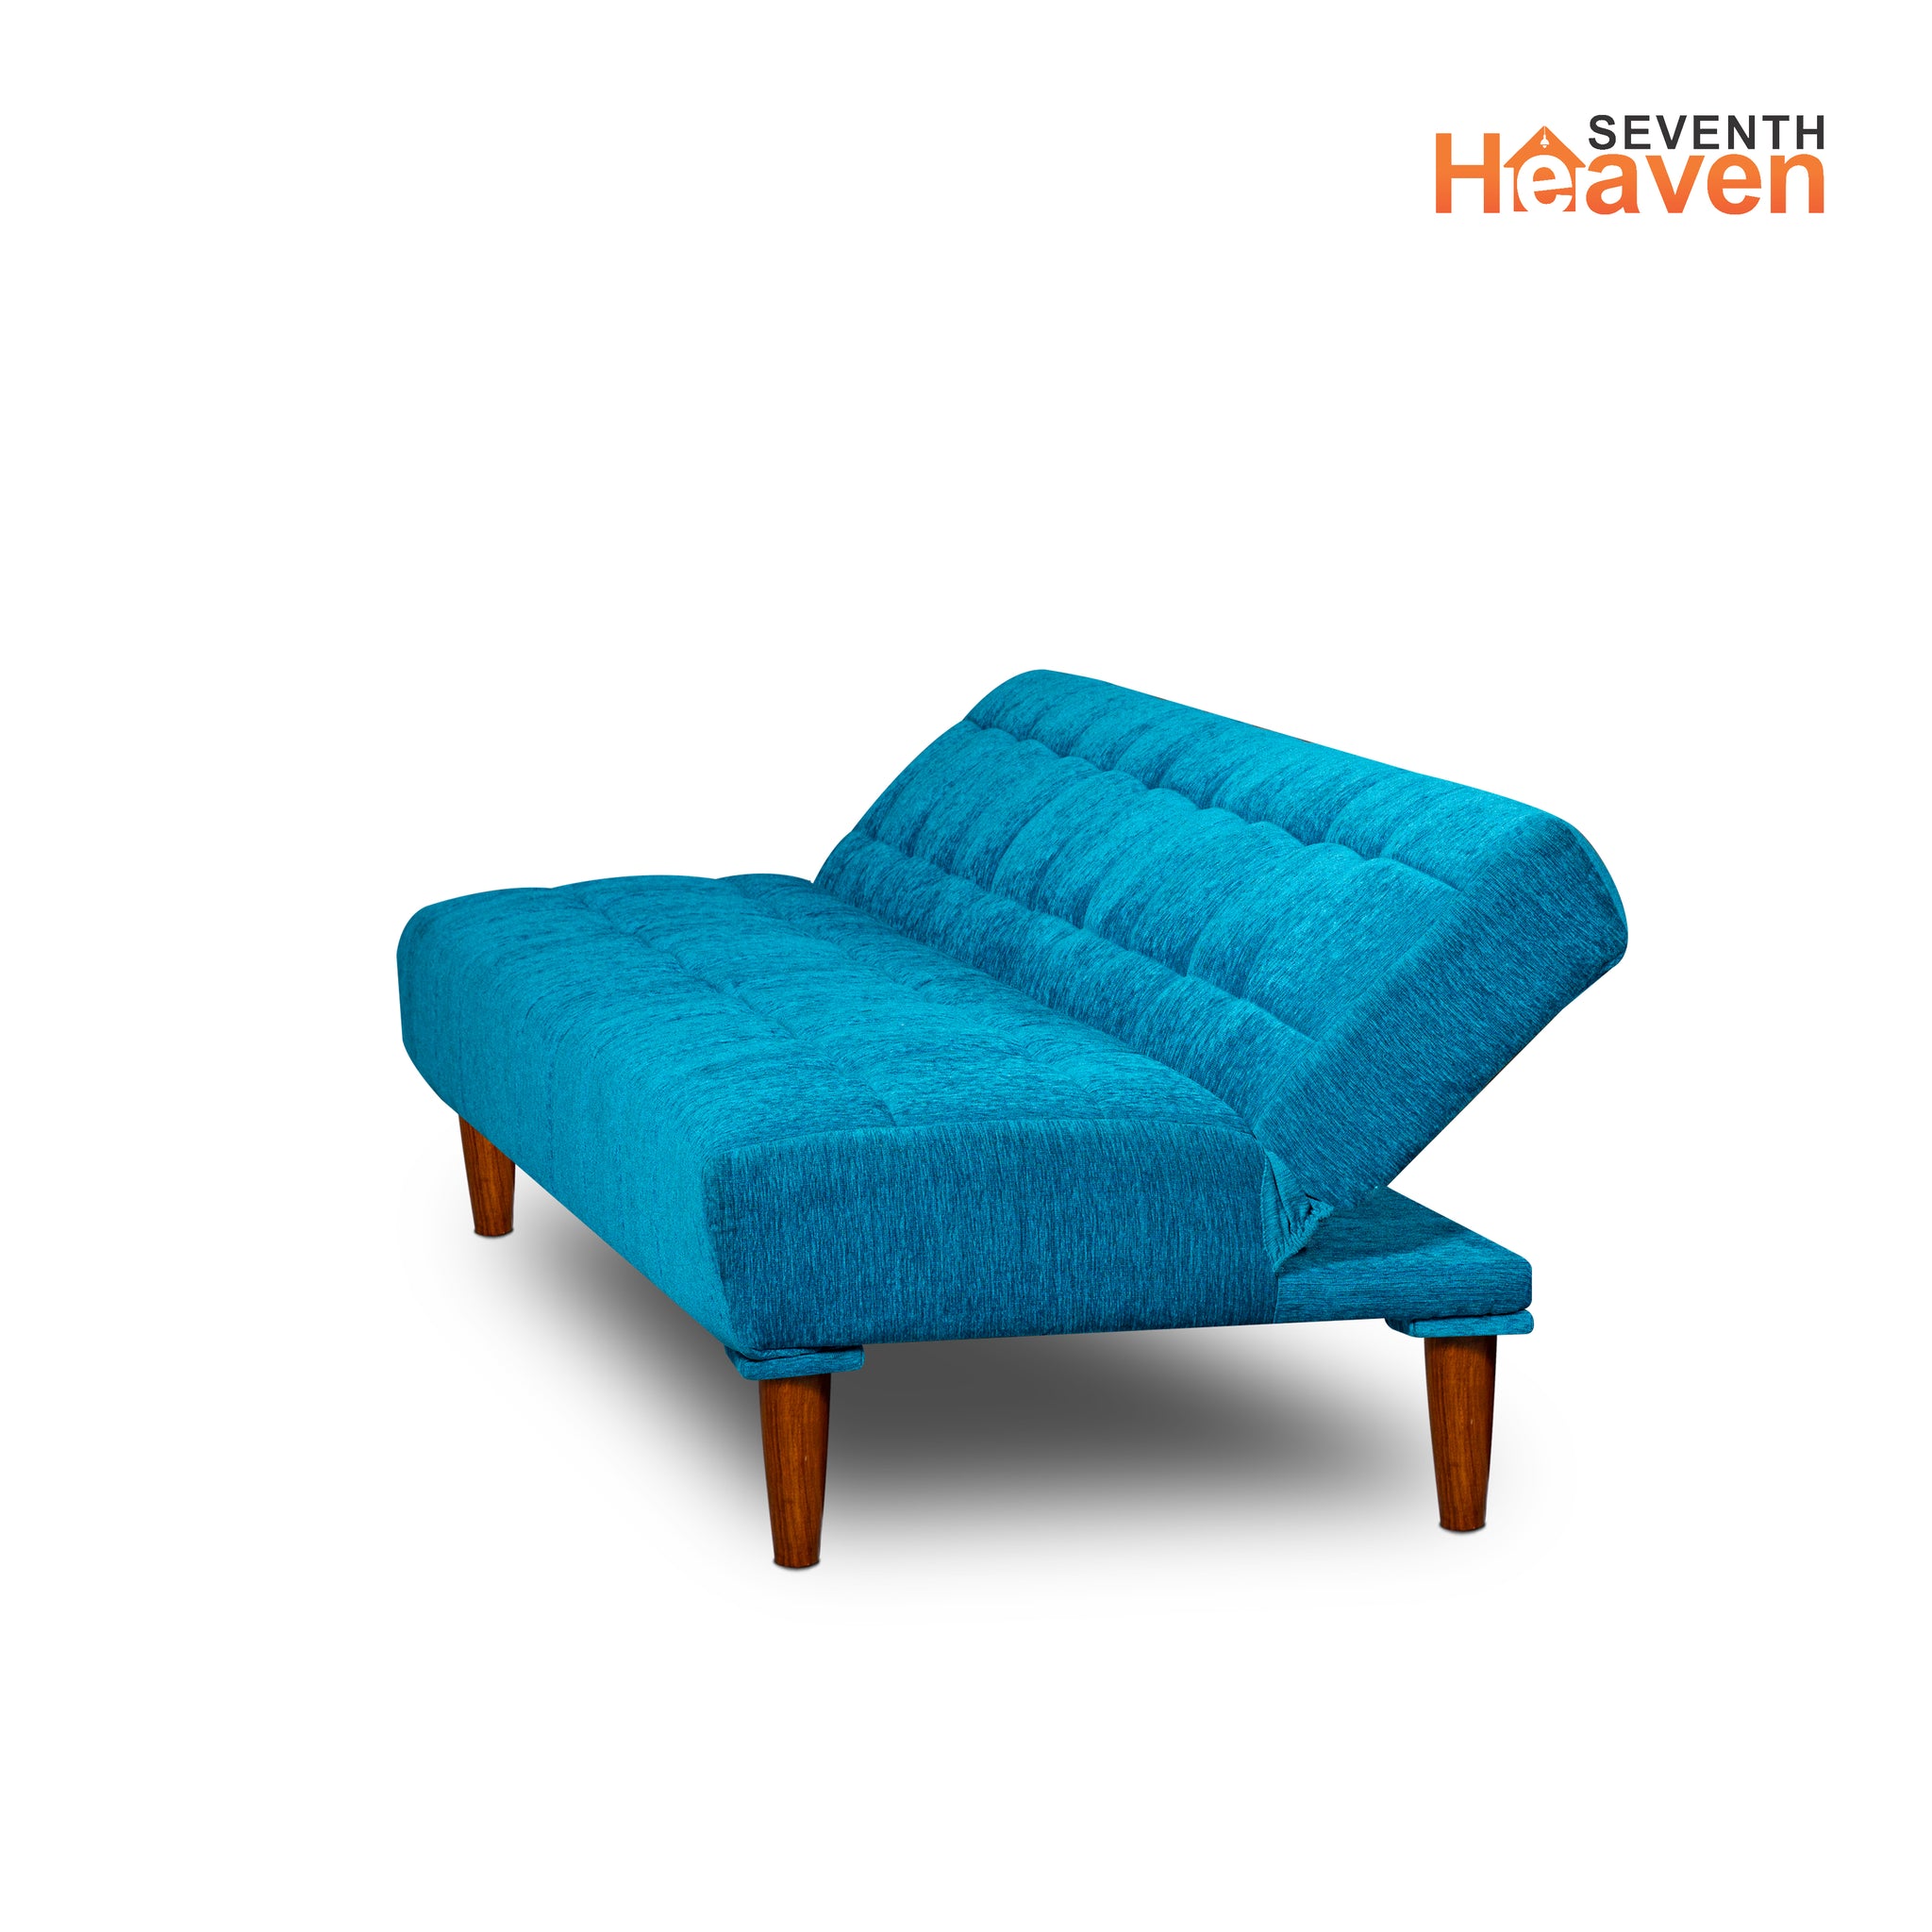 Seventh Heaven Florida Neo 4 Seater Wooden Sofa Cum Bed Modern & Elegant Smart Furniture Range for luxurious homes, living rooms and offices. Use as a sofa, lounger or bed. Perfect for guests. Molphino fabric with sheesham polished wooden legs. Sky Blue colour.